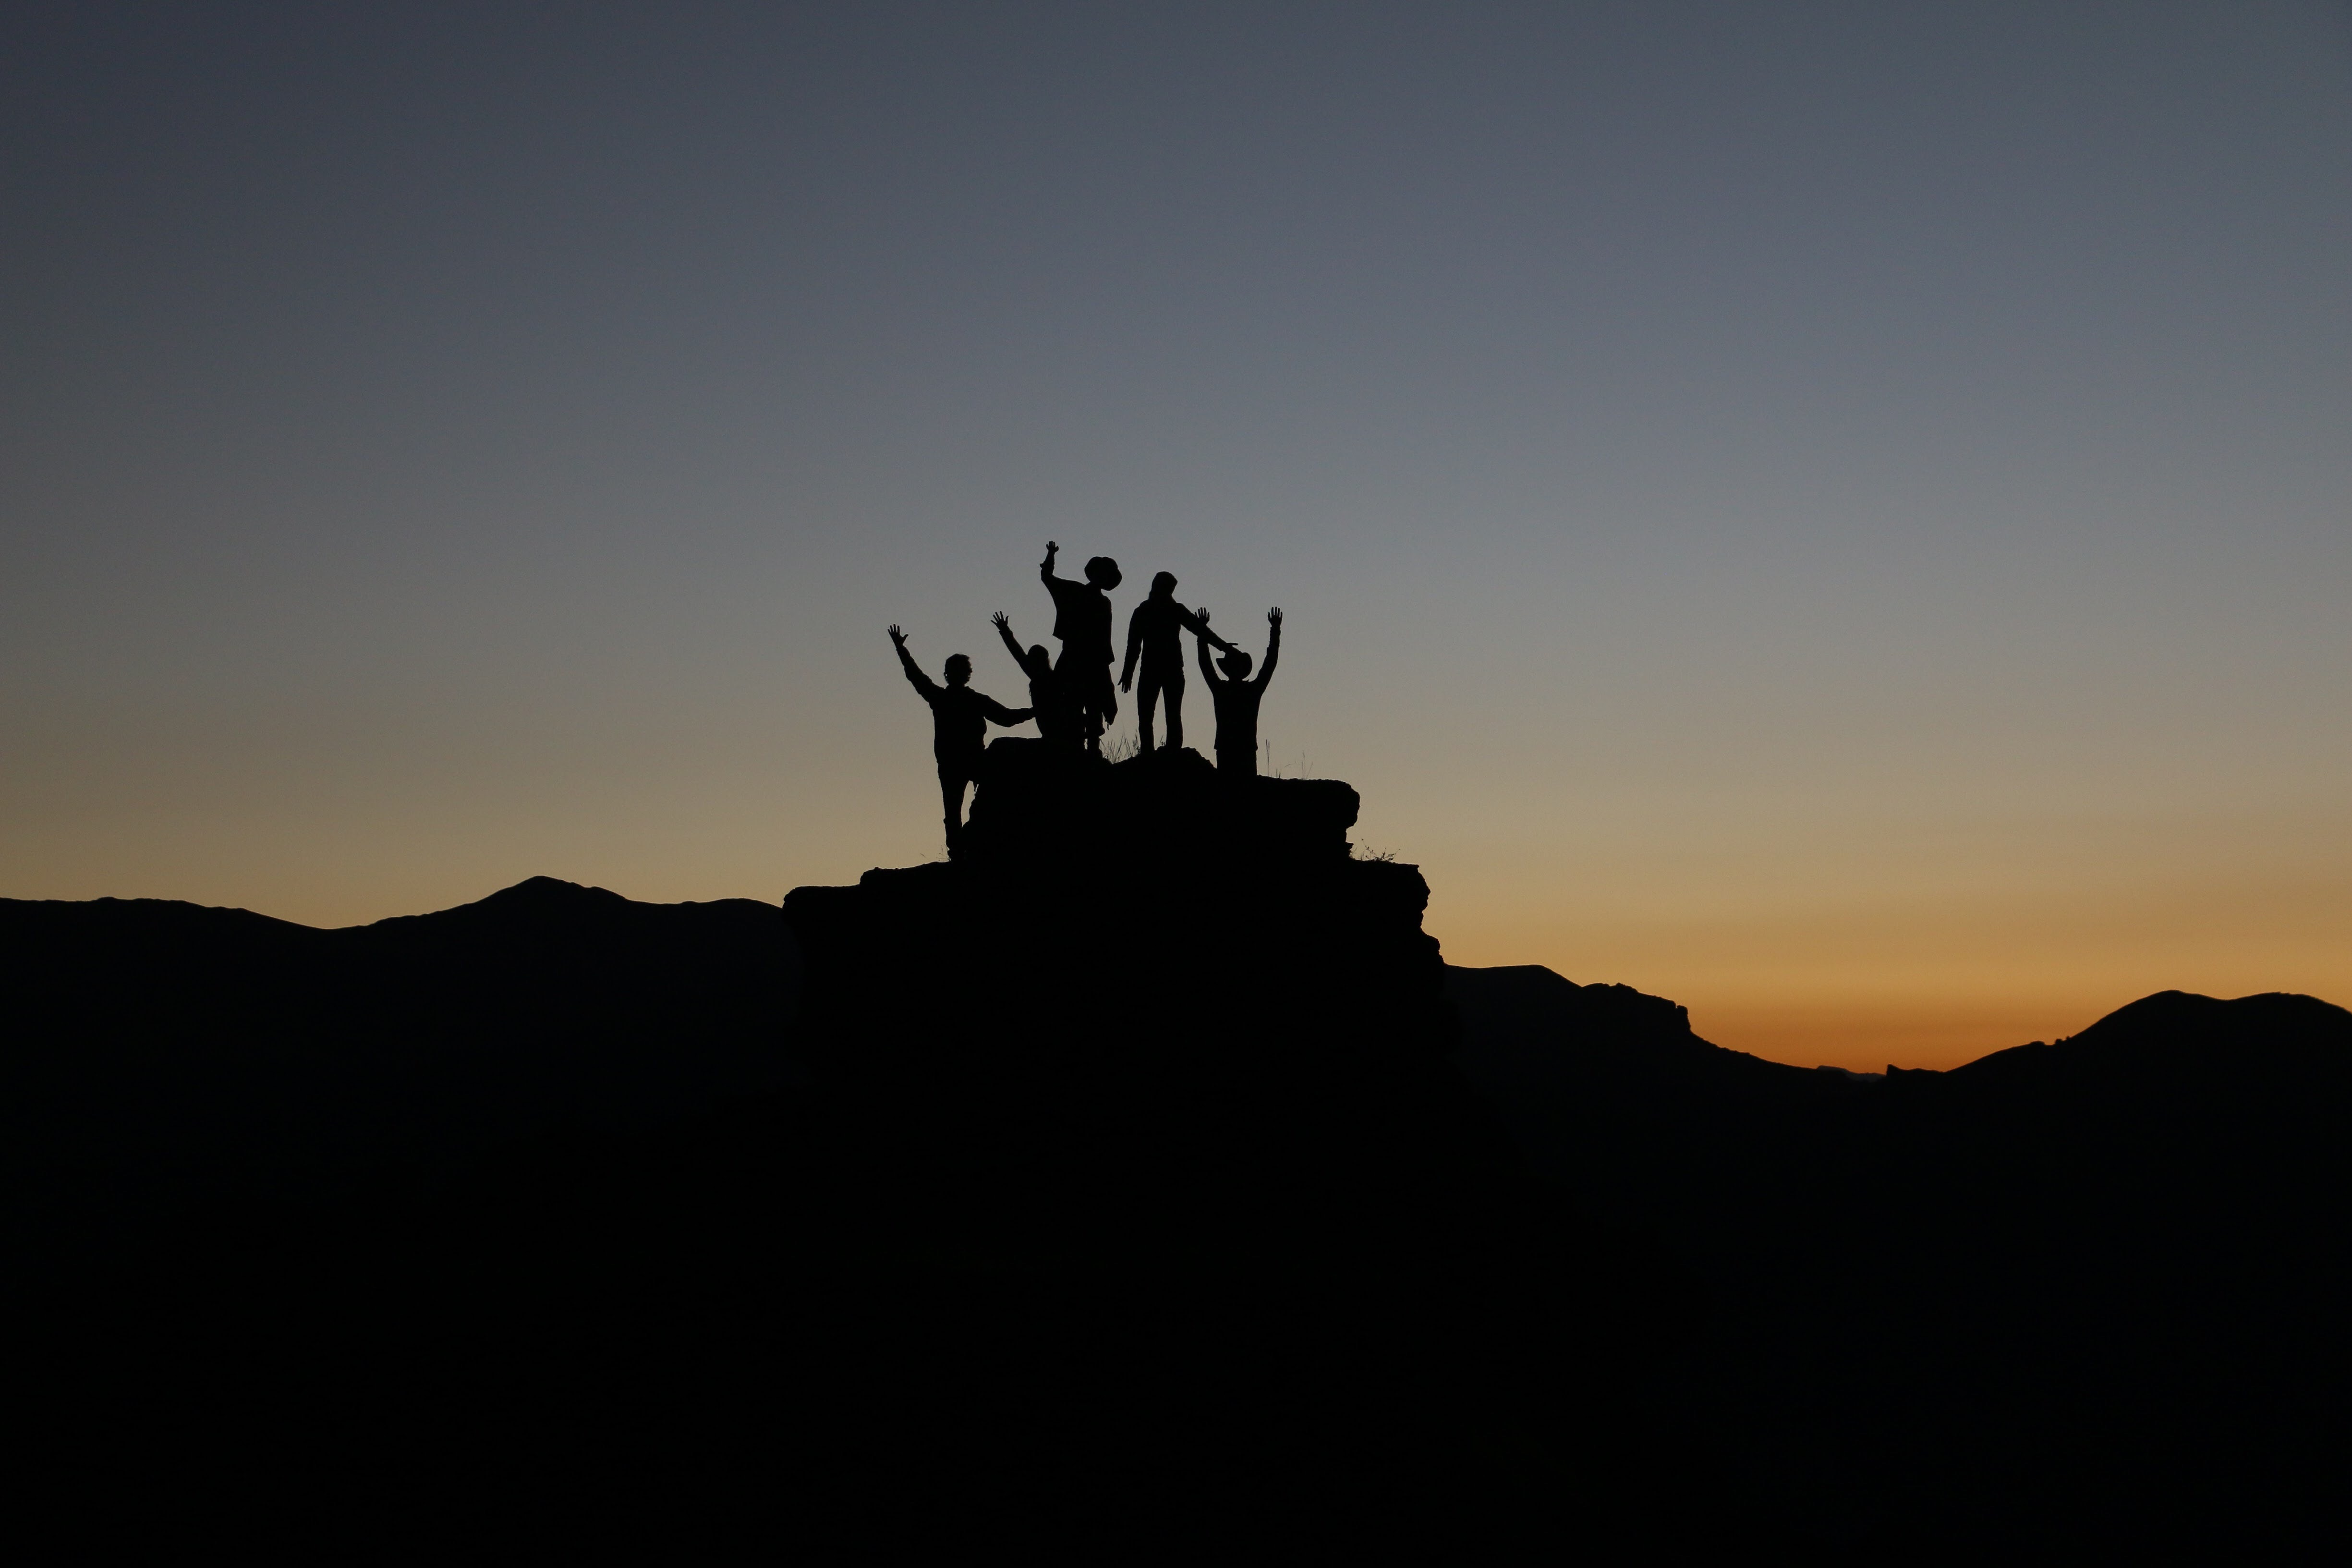 Figures in silhouette raising their hands on top of a mountain at sunset